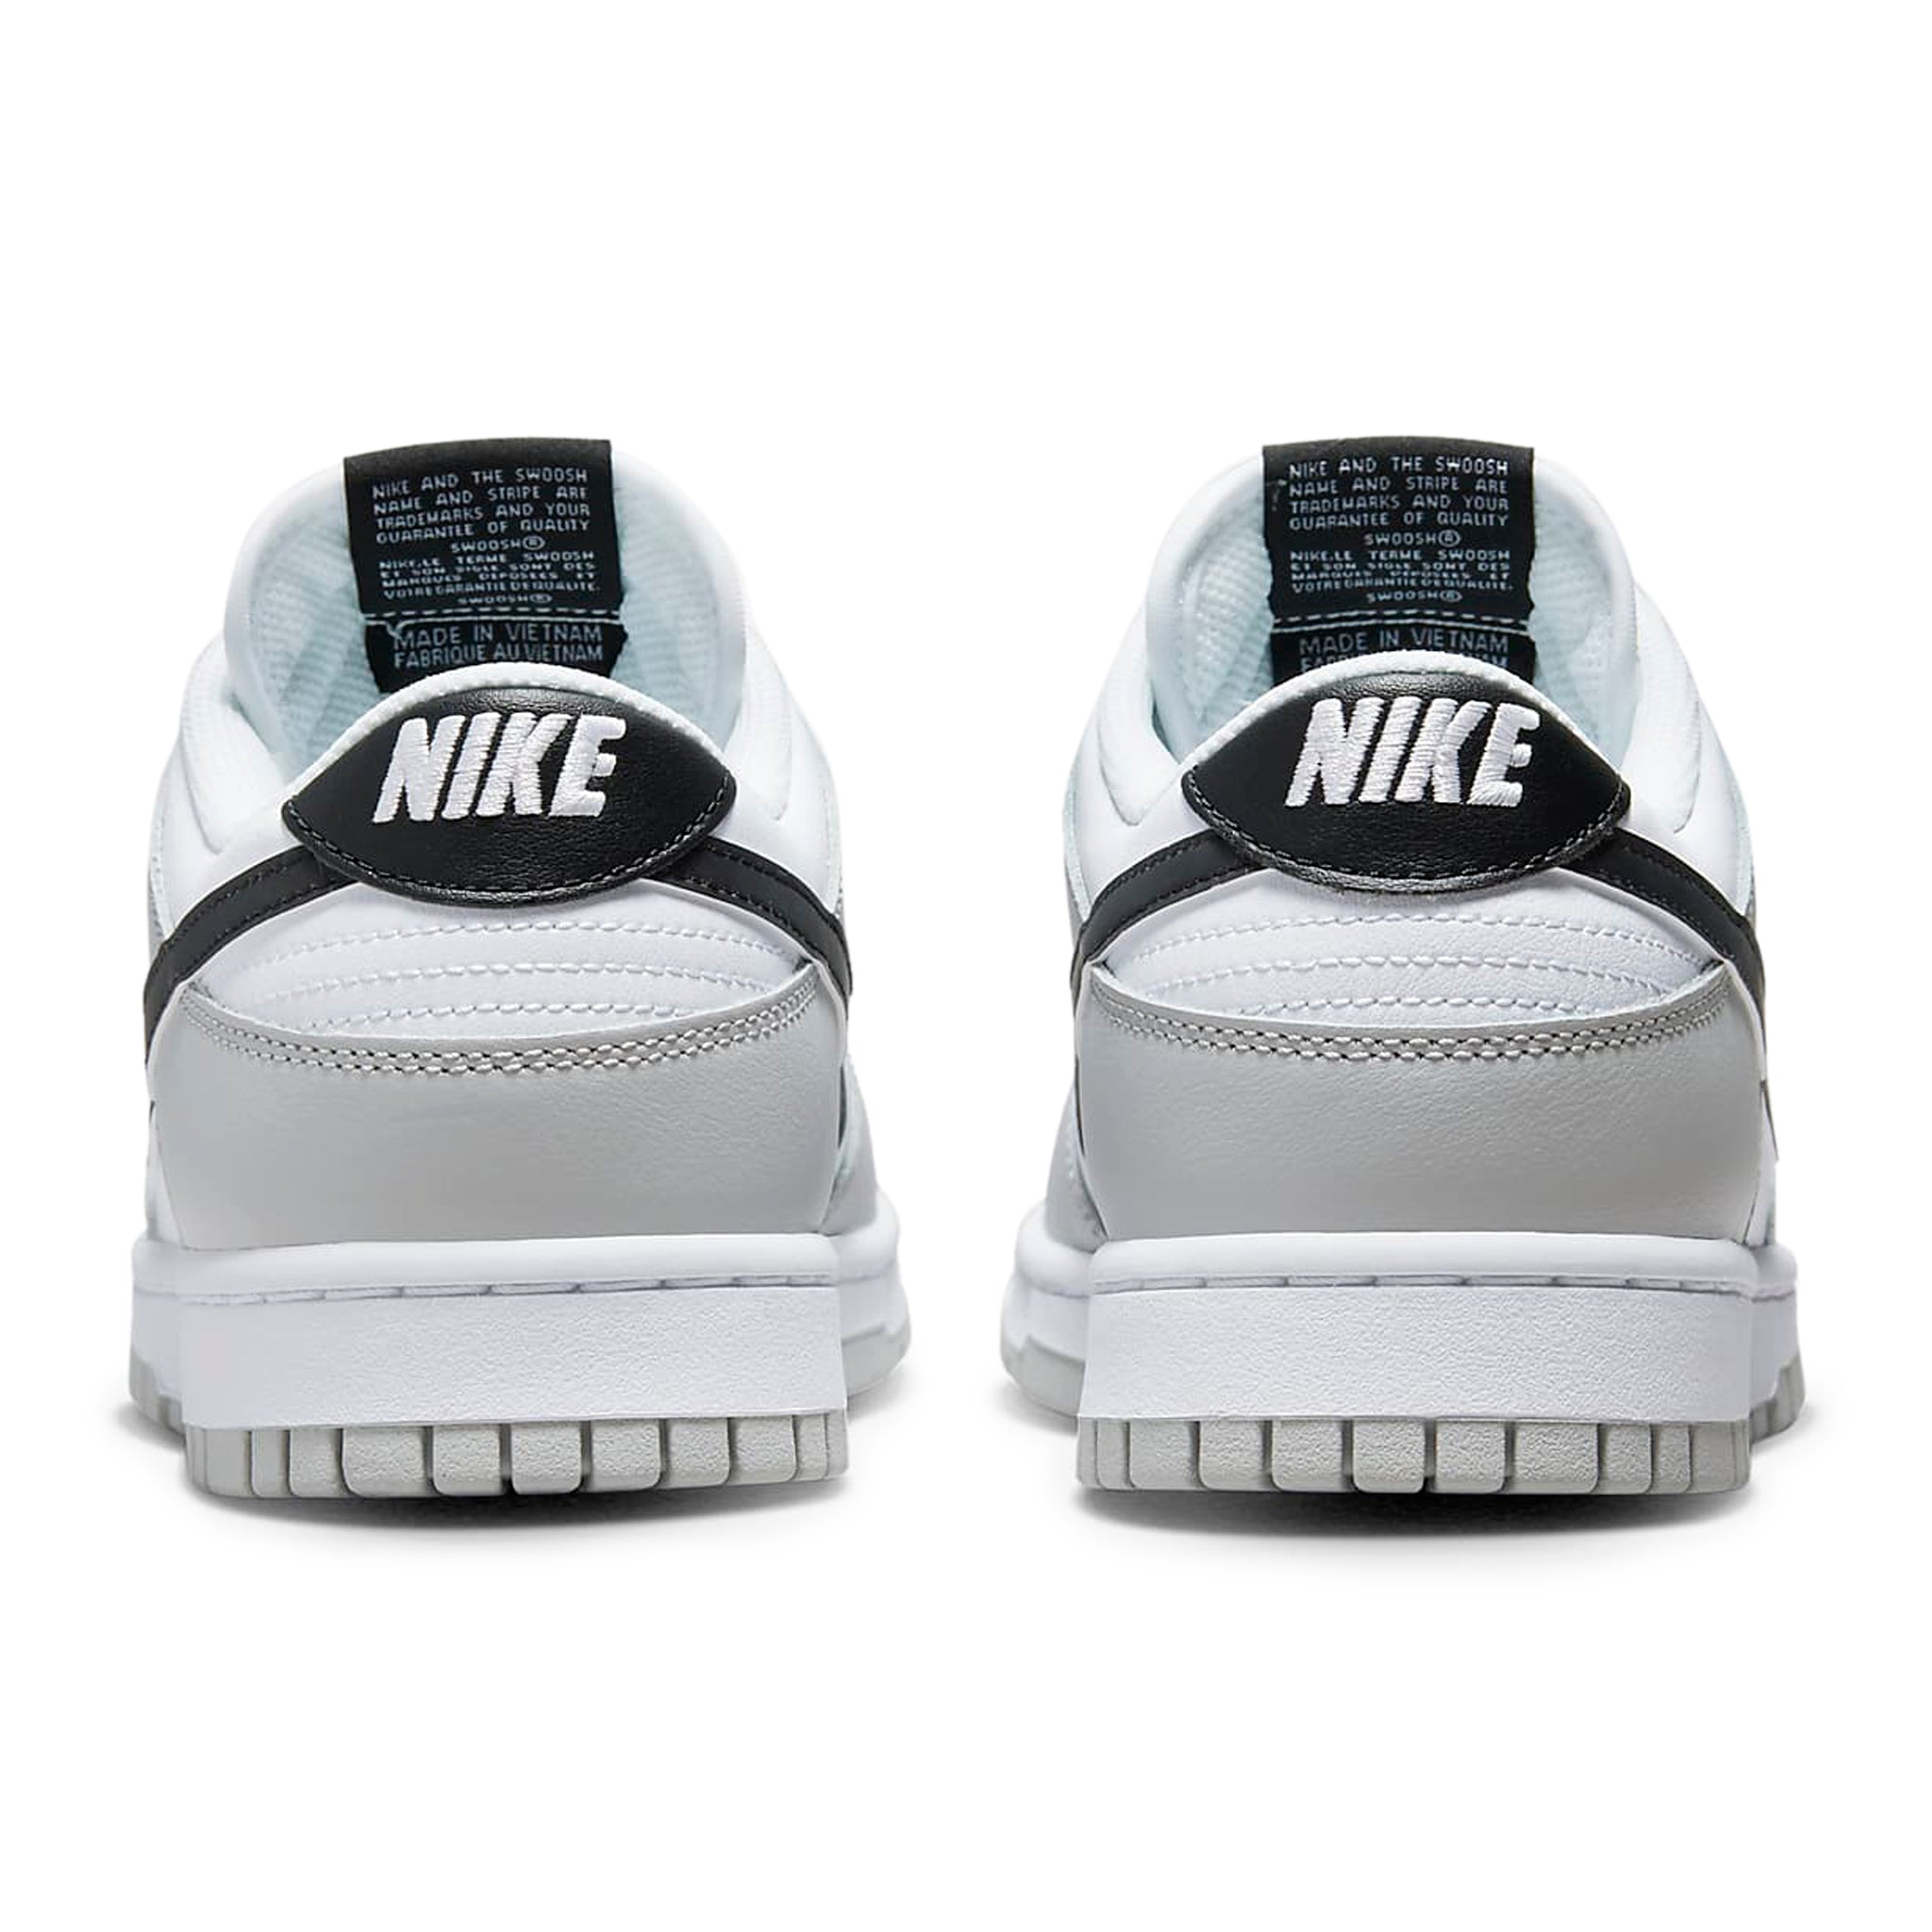 Heel view of Nike Dunk Low SE Jackpot DR9654-001